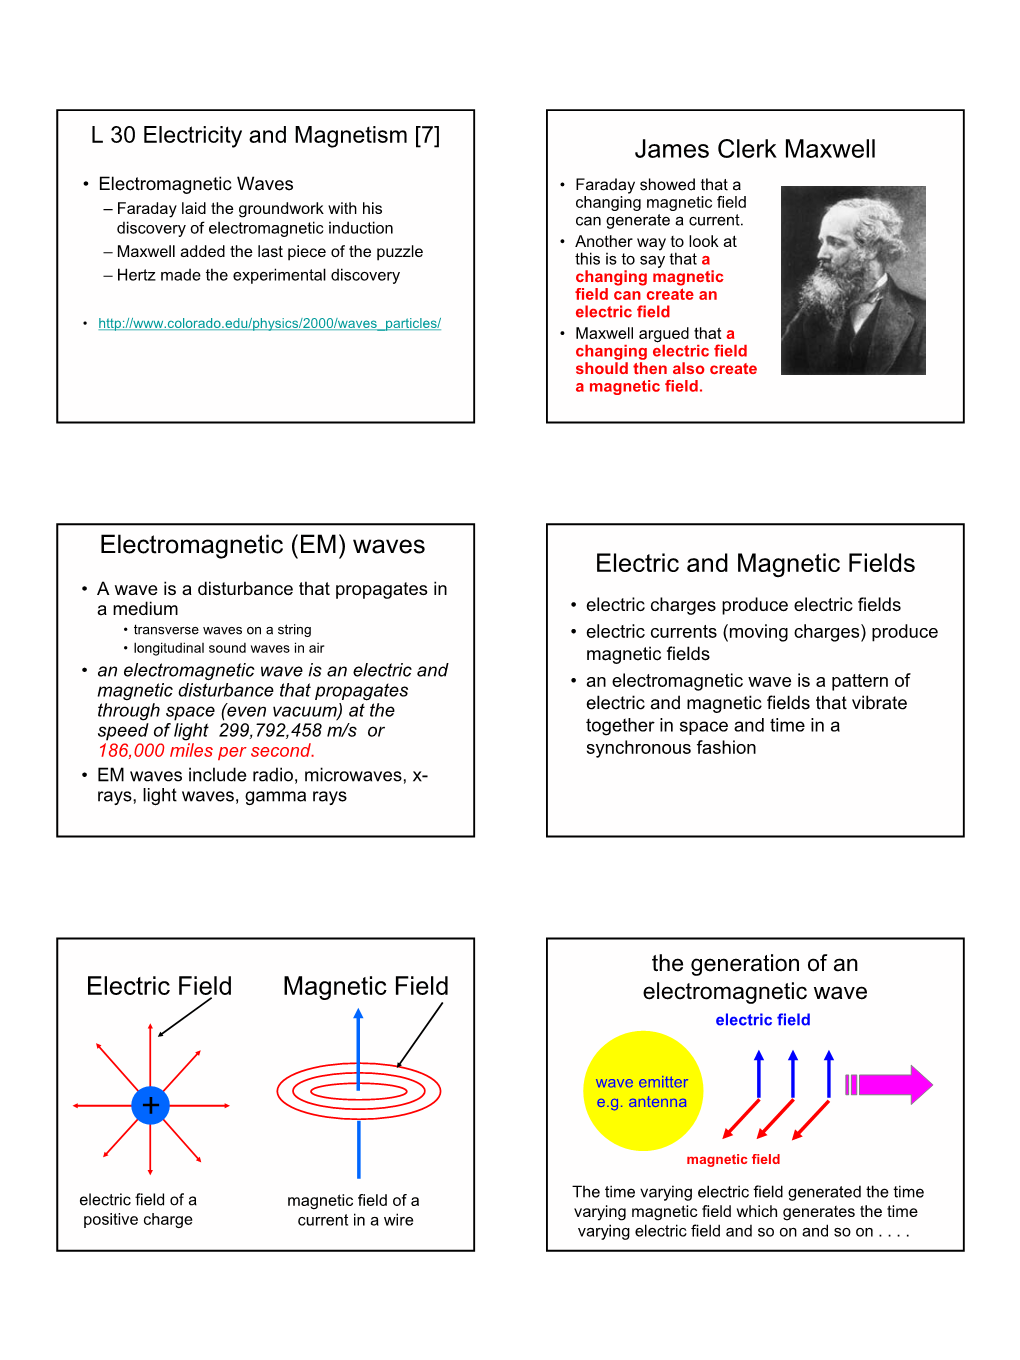 James Clerk Maxwell Electromagnetic (EM) Waves Electric and Magnetic